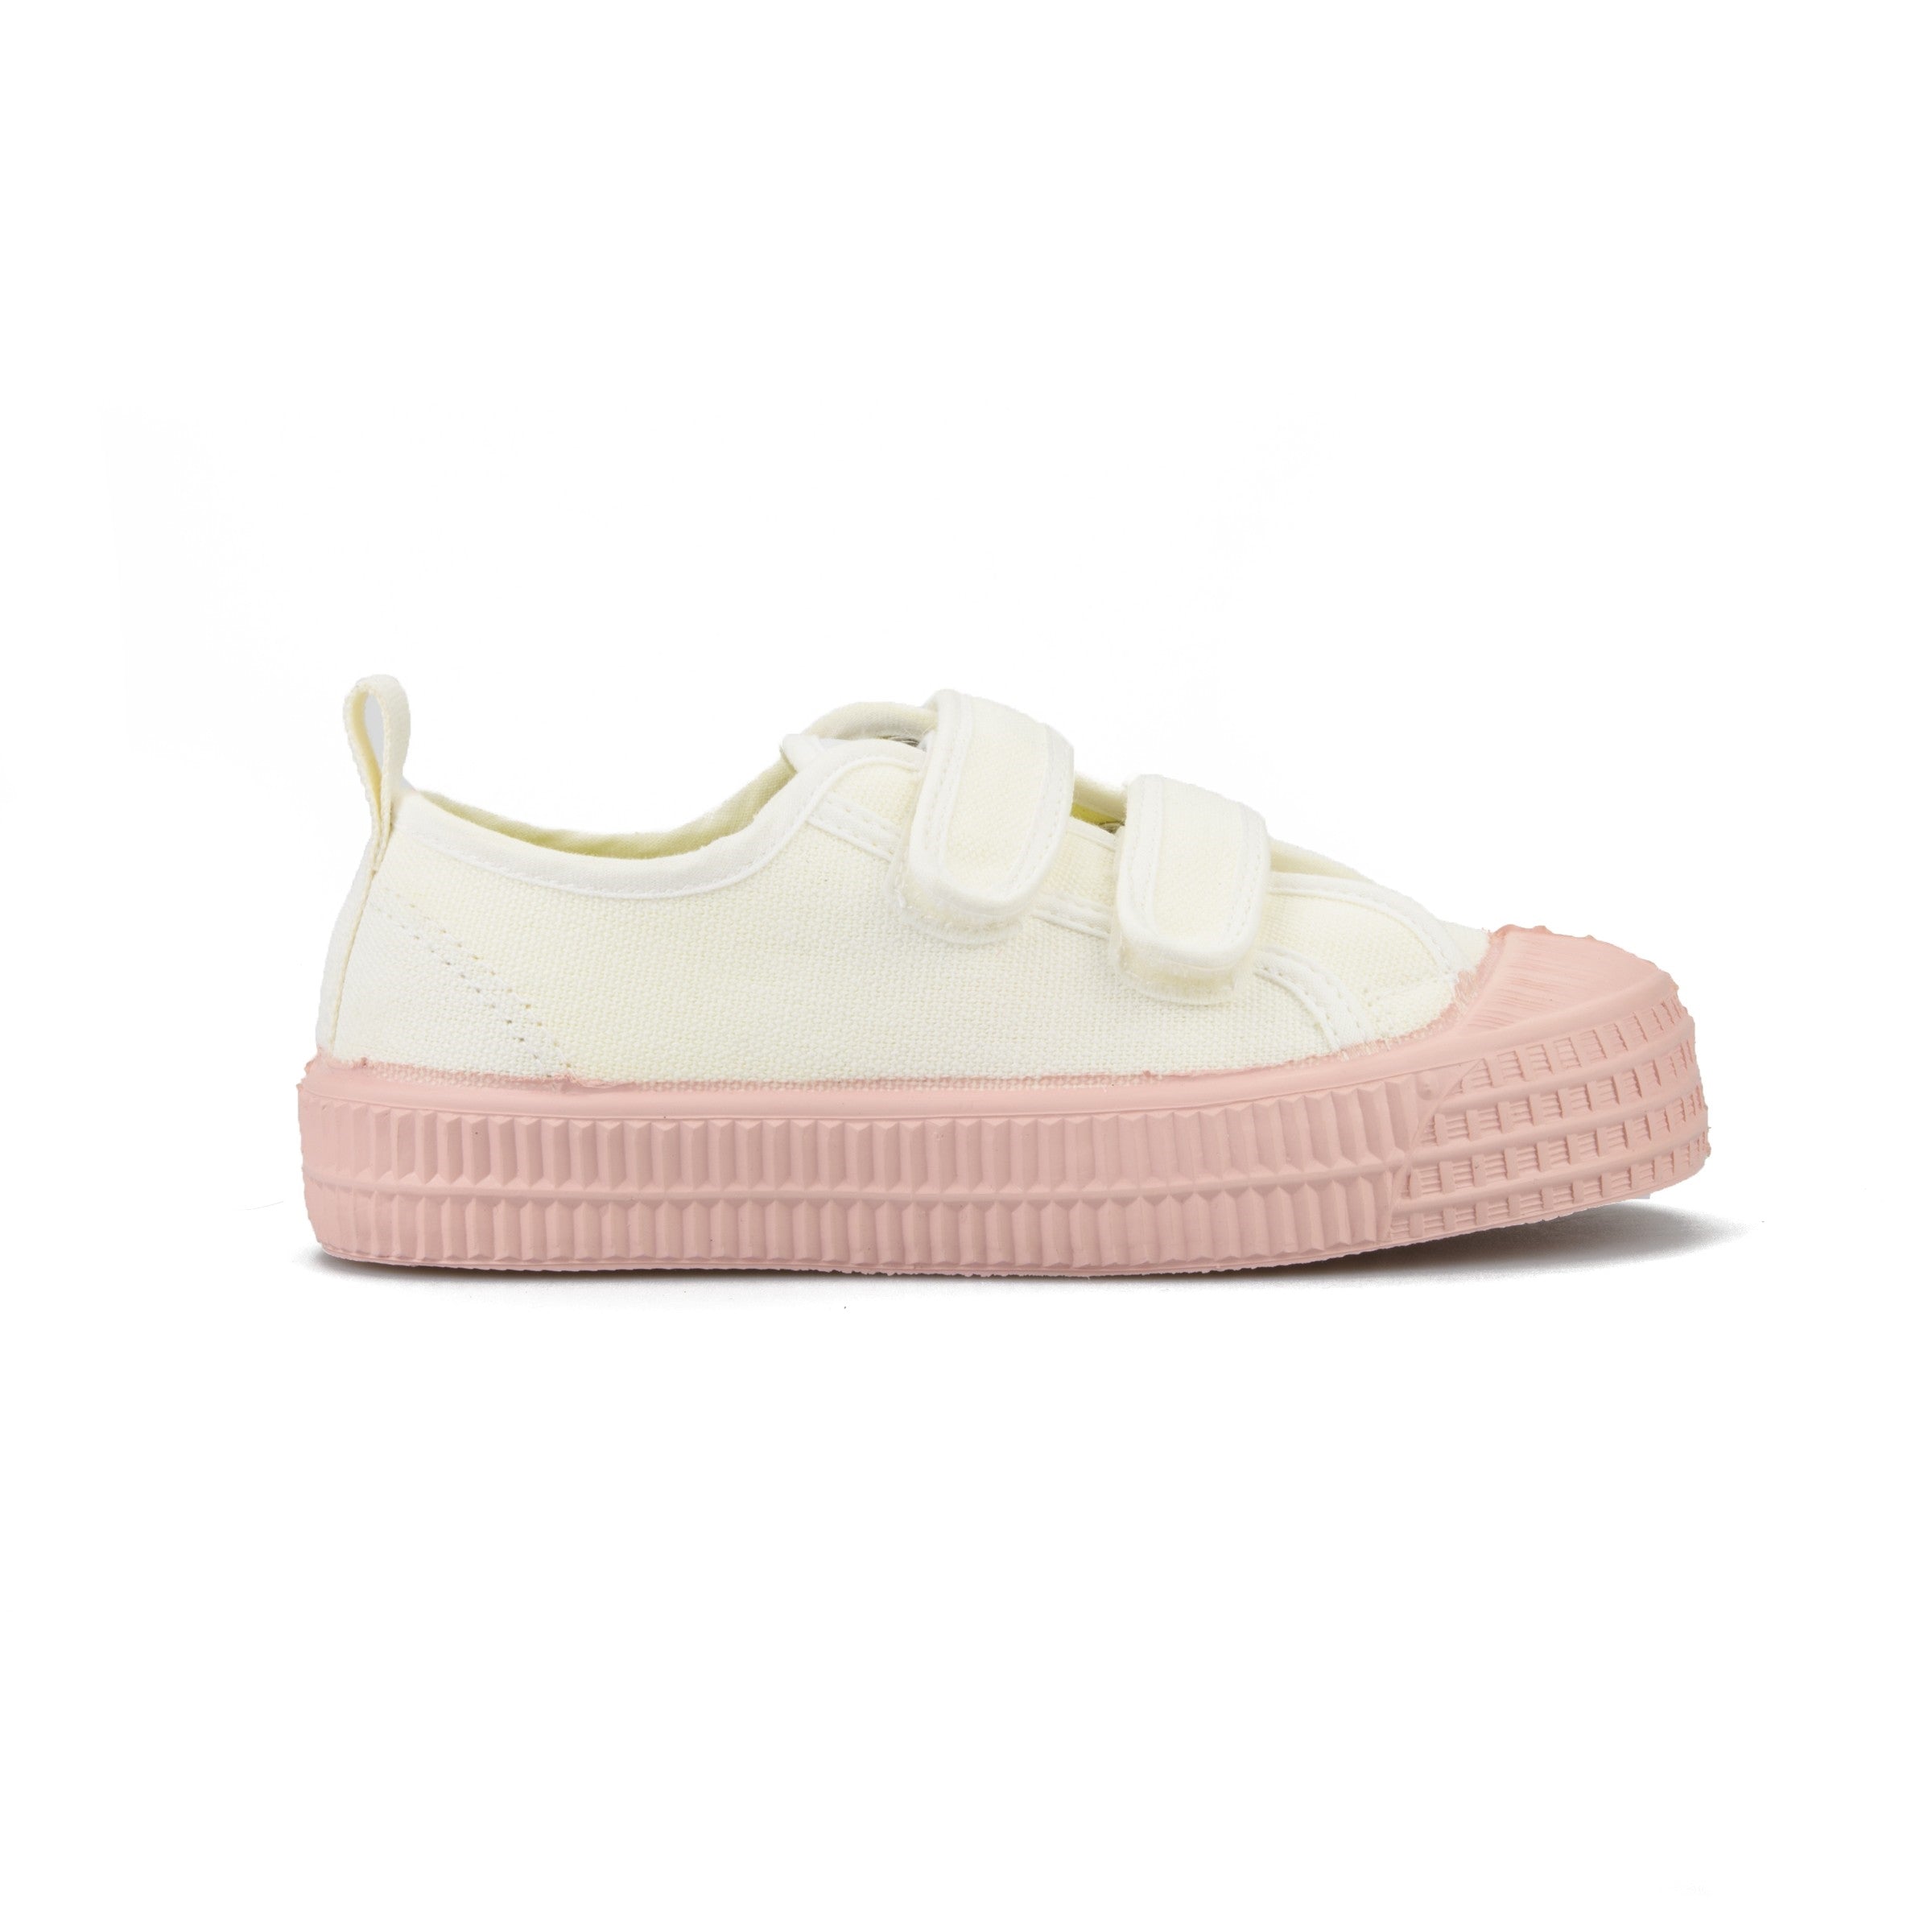 Girls White & Pink Canvas Shoes